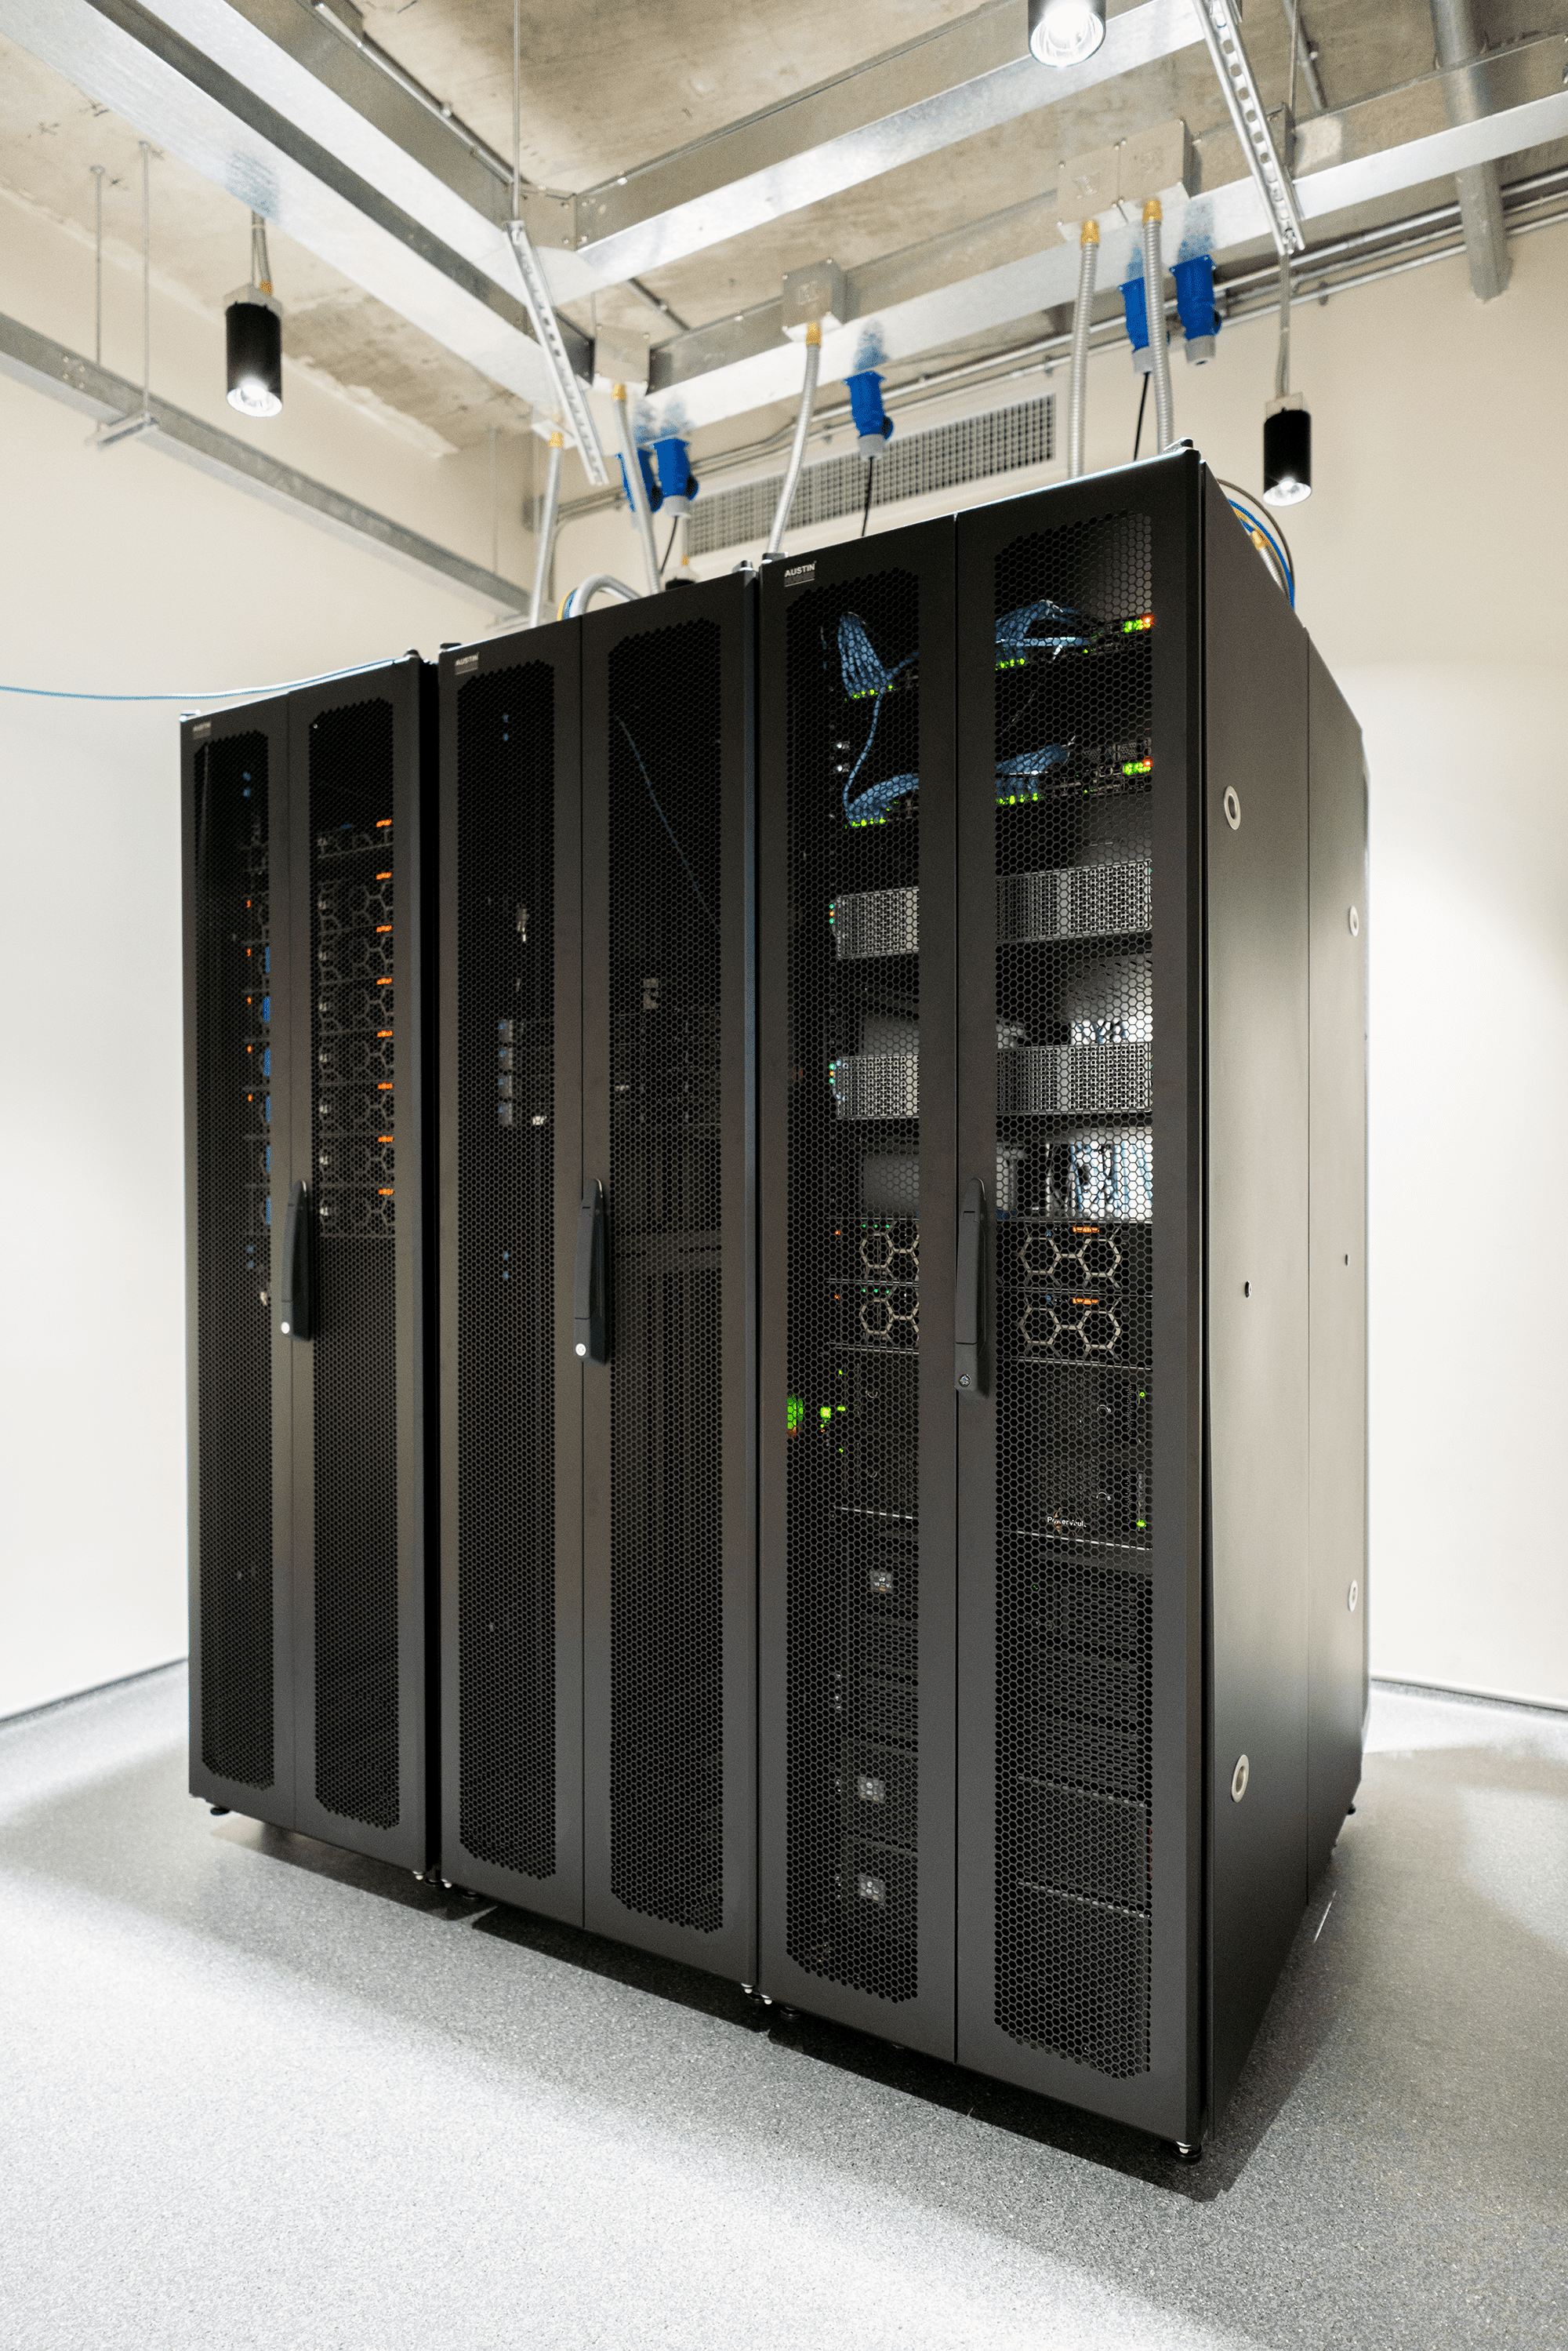 High Performance Computer Cluster for material simulation and artificial intelligence research.